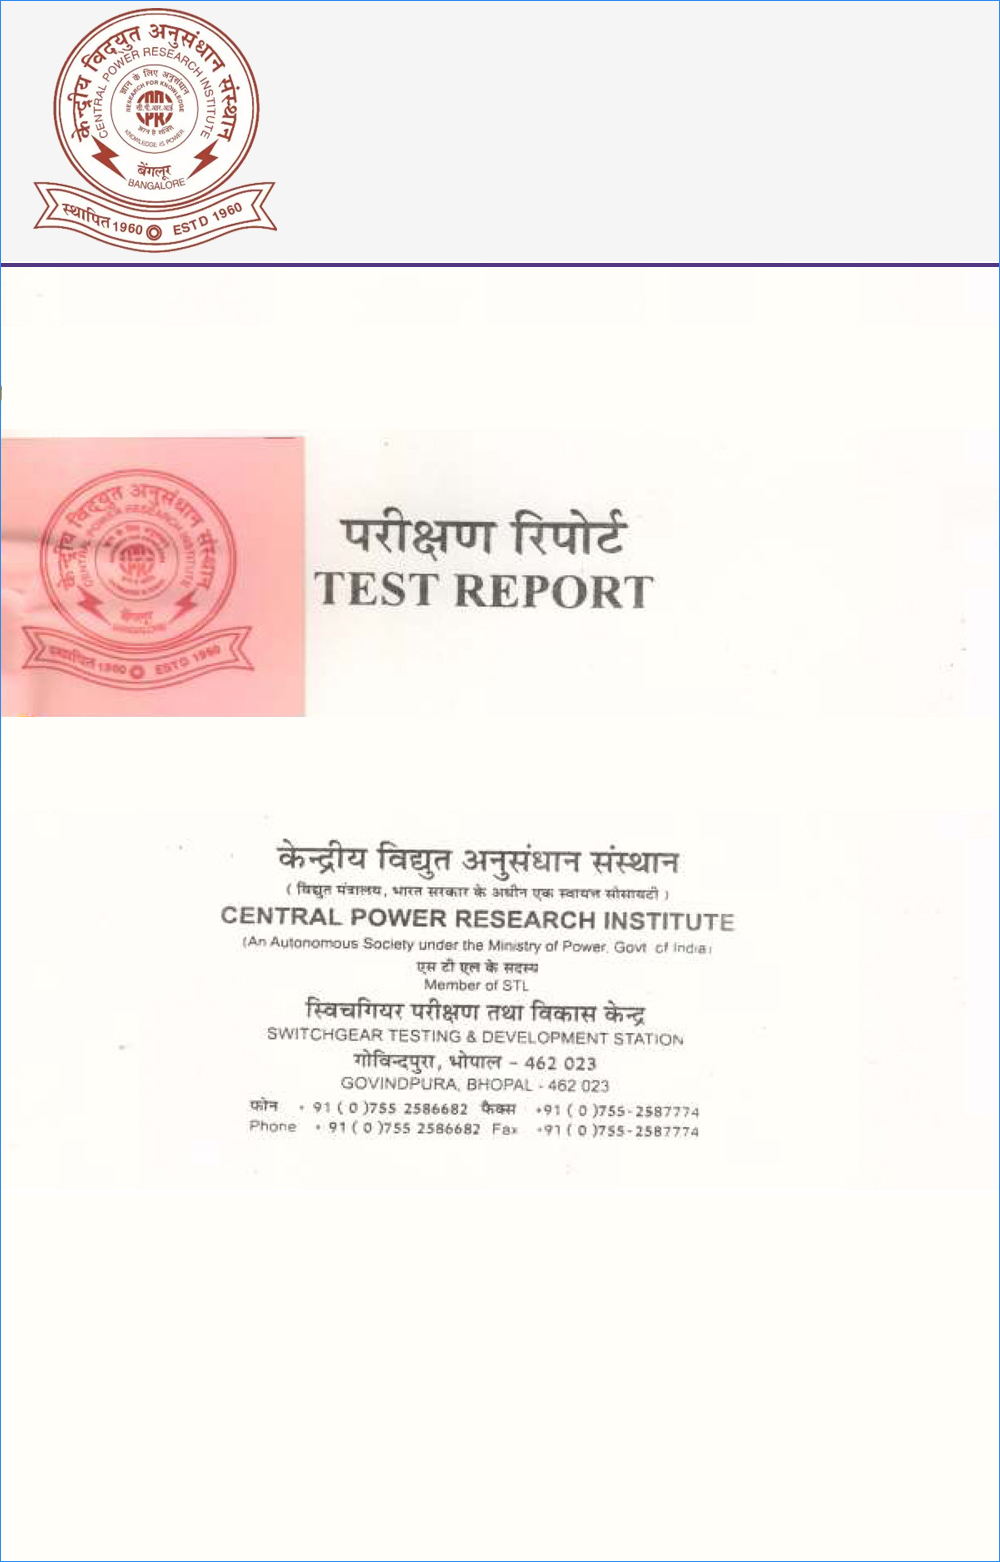 nabl-and-rohs-certificate